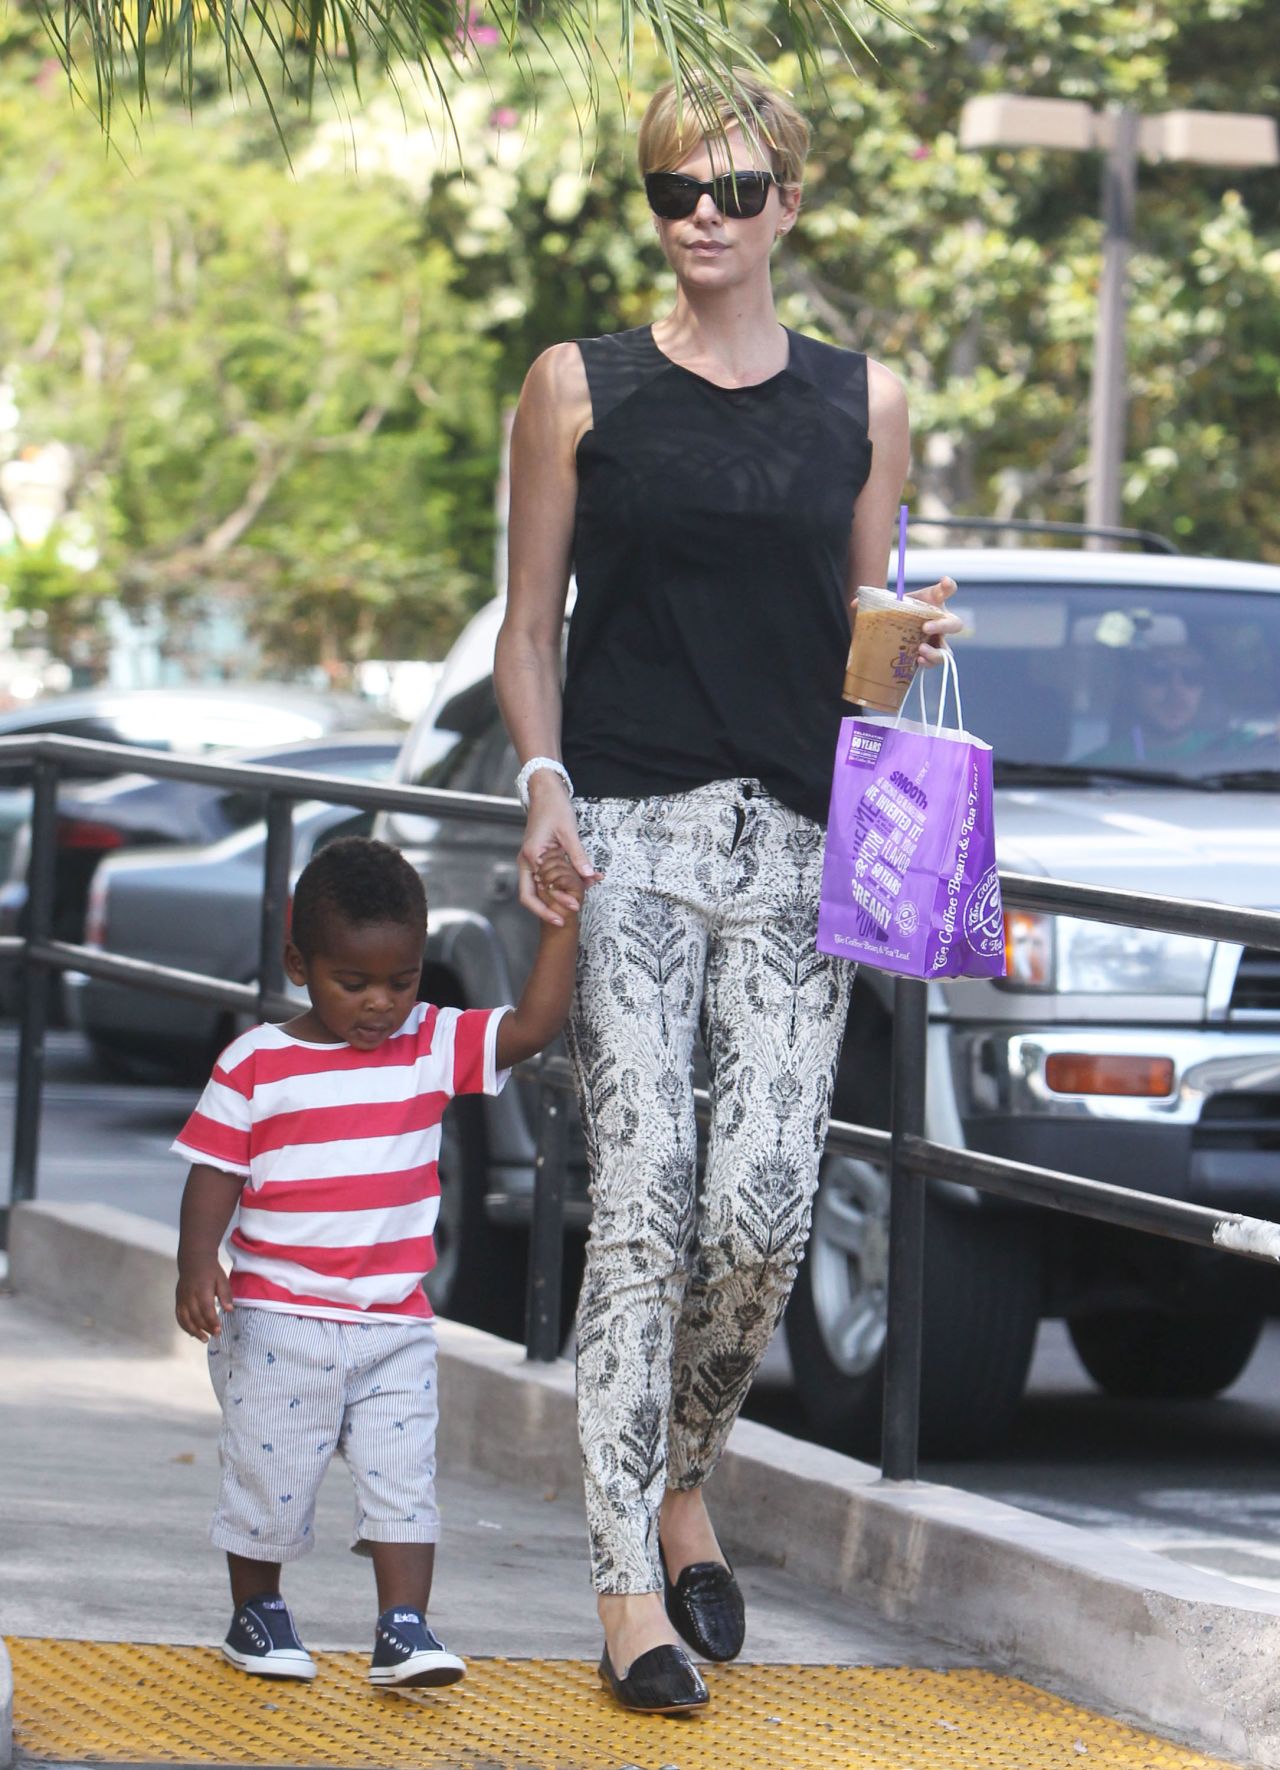 Charlize Theron and her son take a stroll after shopping on September 25.